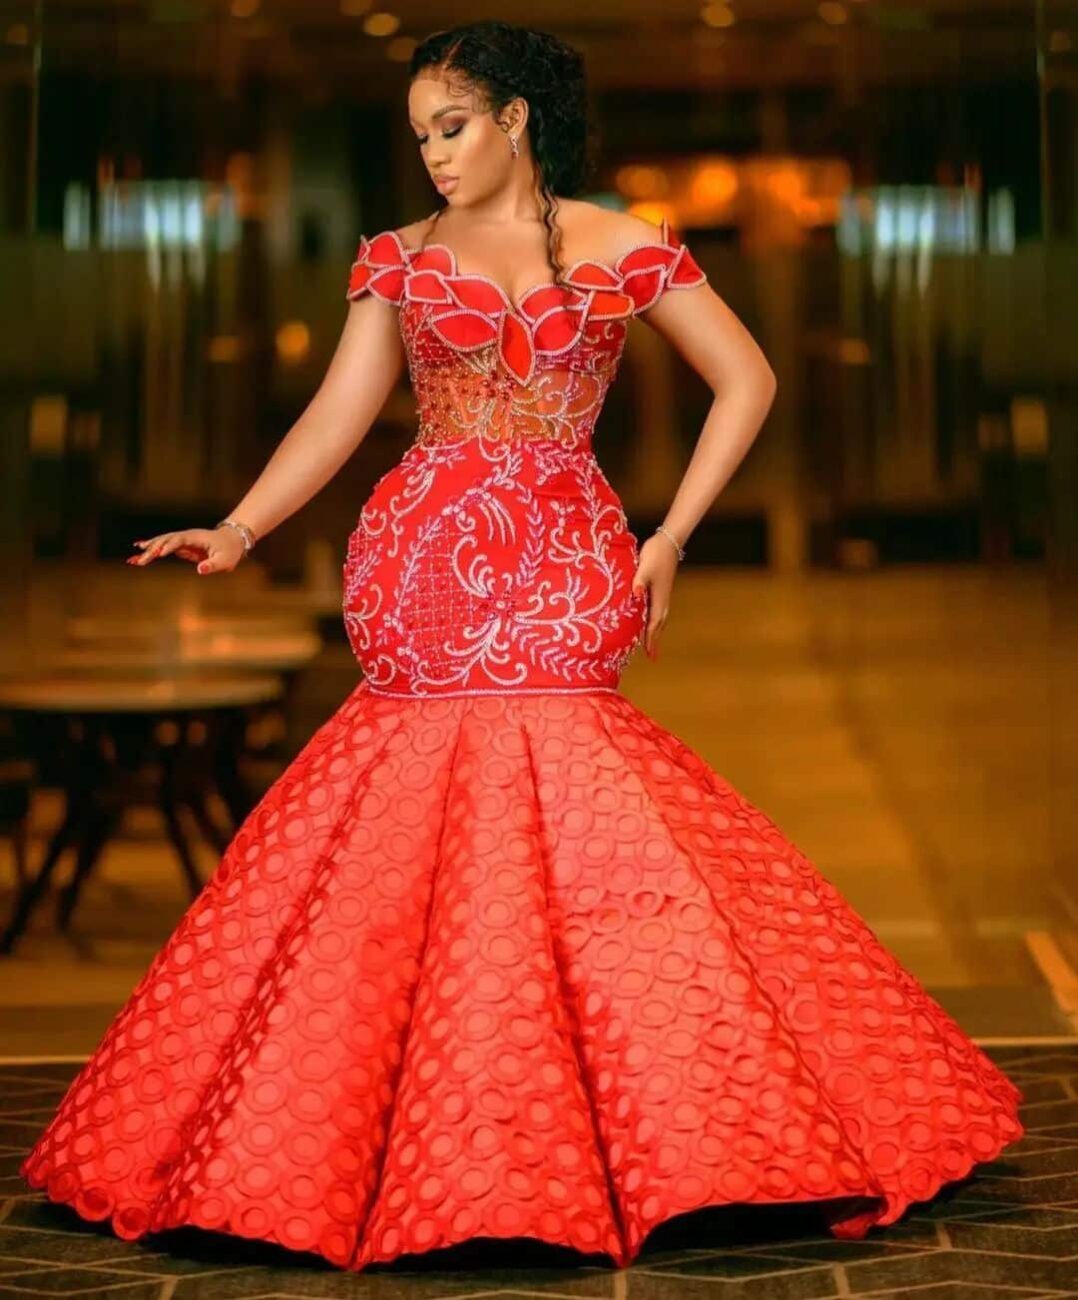 Classy Ankara Long Dresses Gown Style For Ladies 2022